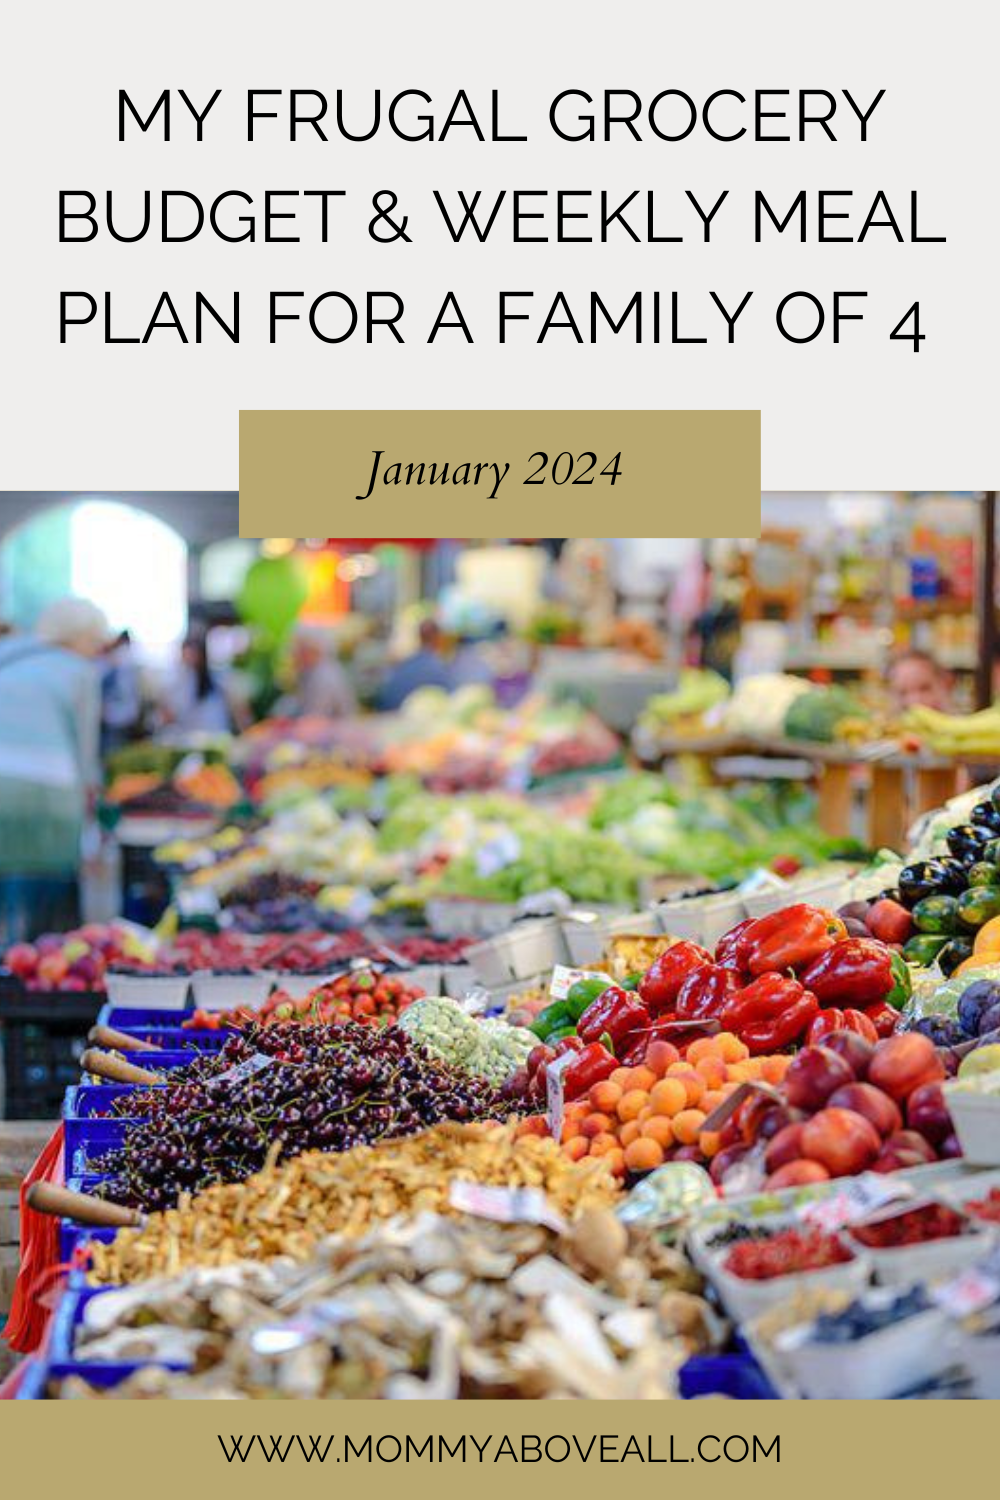 January 2024 – Our Frugal Weekly Grocery Budget Meal